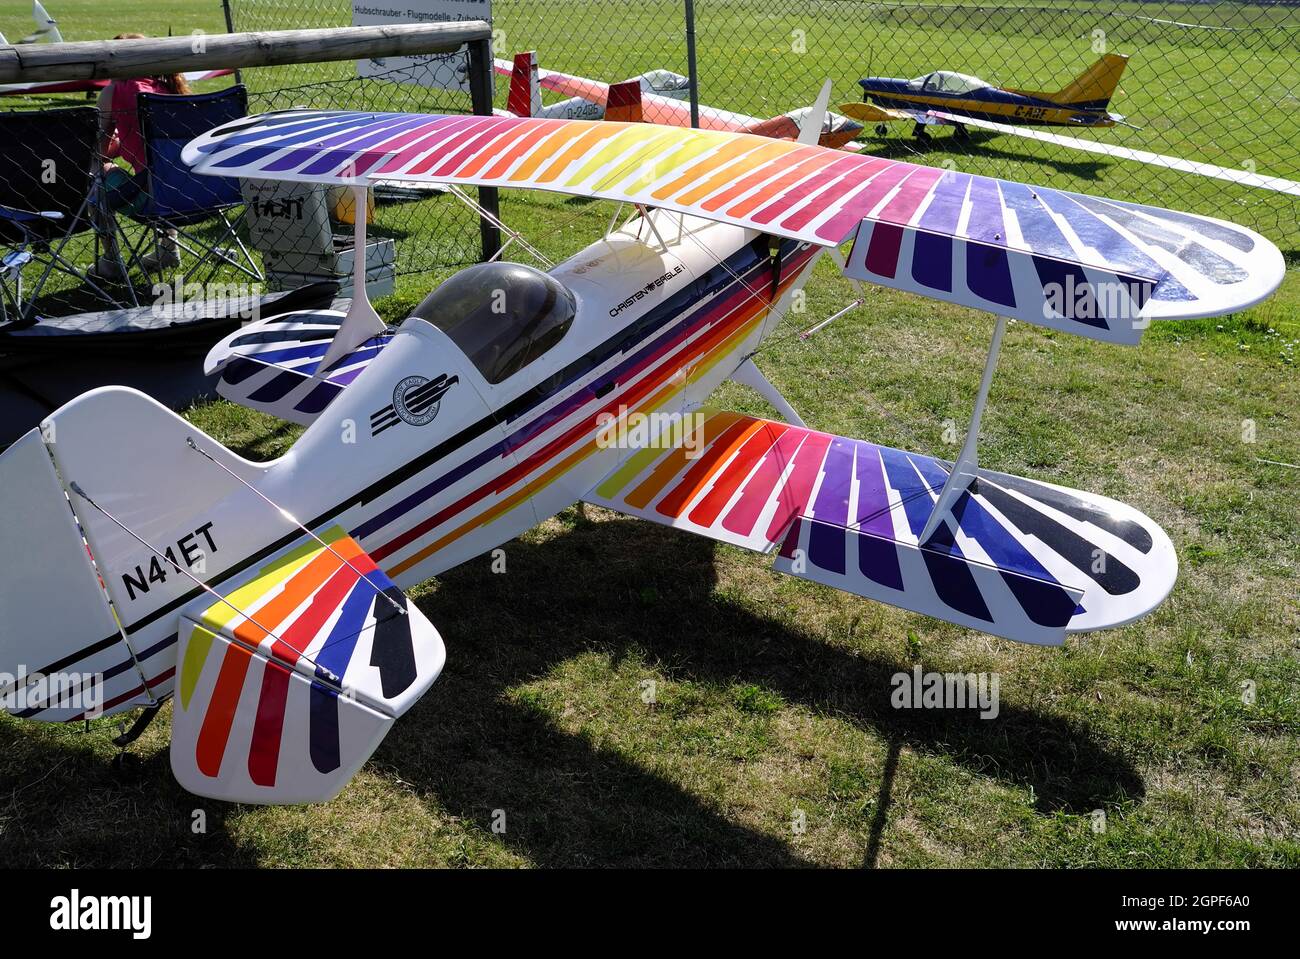 Remote controlled colorful biplane aerobatic model Christen Eagle with propeller on the ground in Germany, Europe Stock Photo